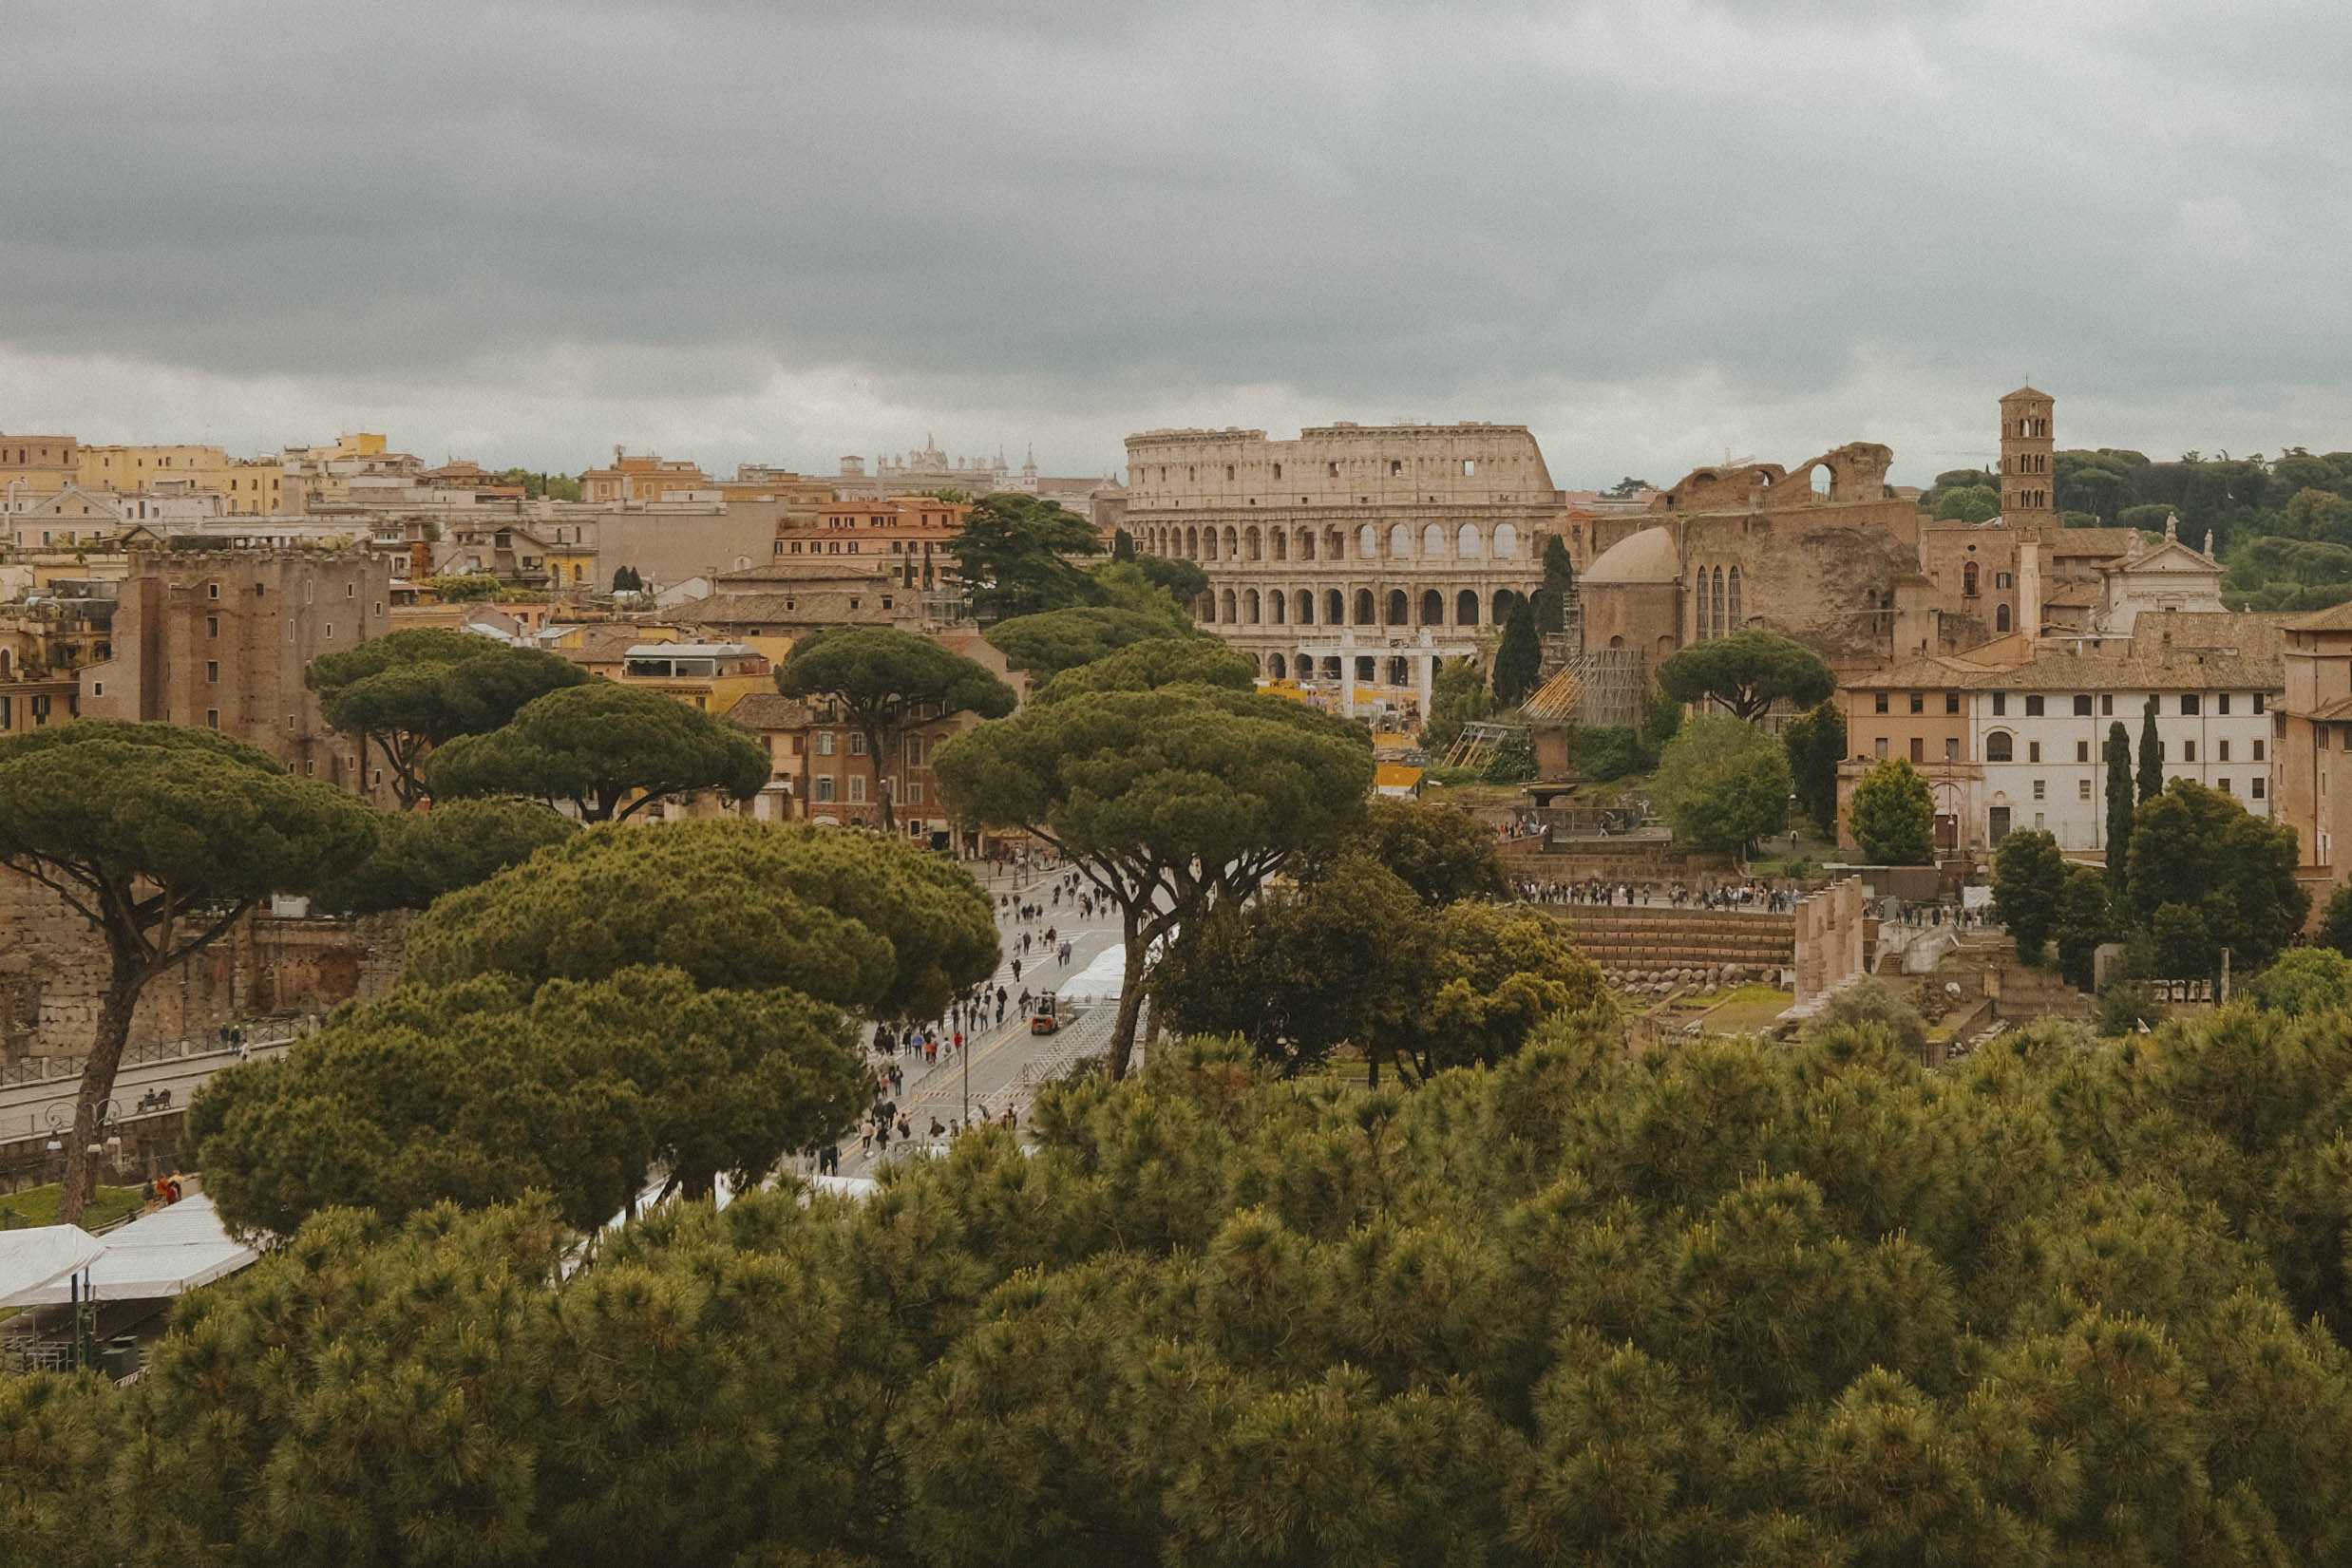 Looking towards Colosseum from Roman Forum